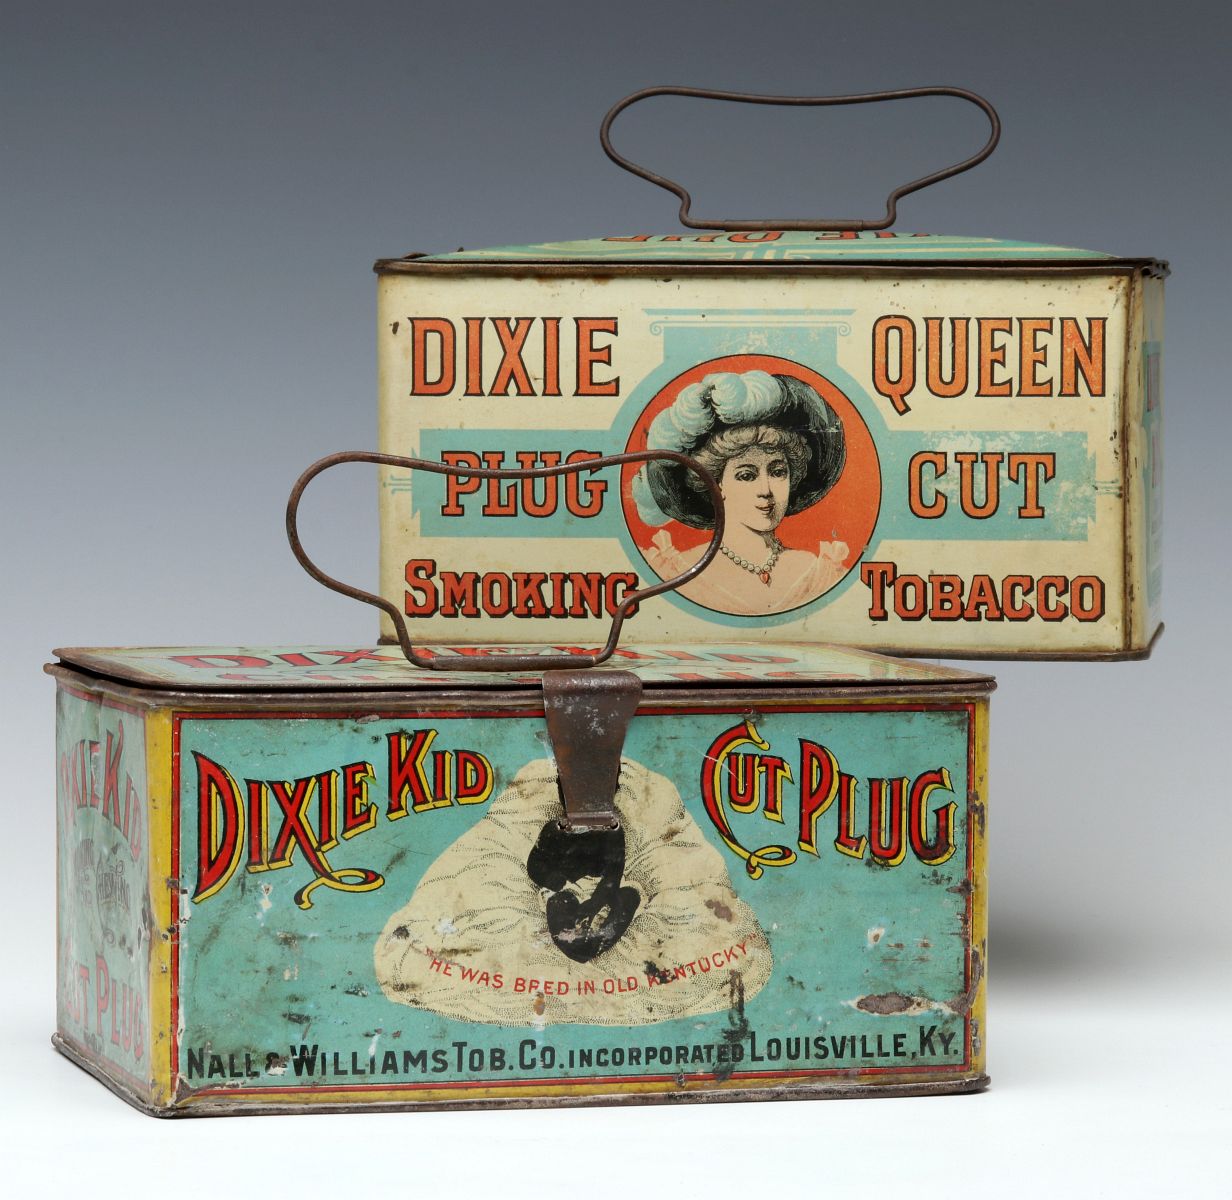 DIXIE KID AND DIXIE QUEEN TIN LITHO TOBACCO PAILS